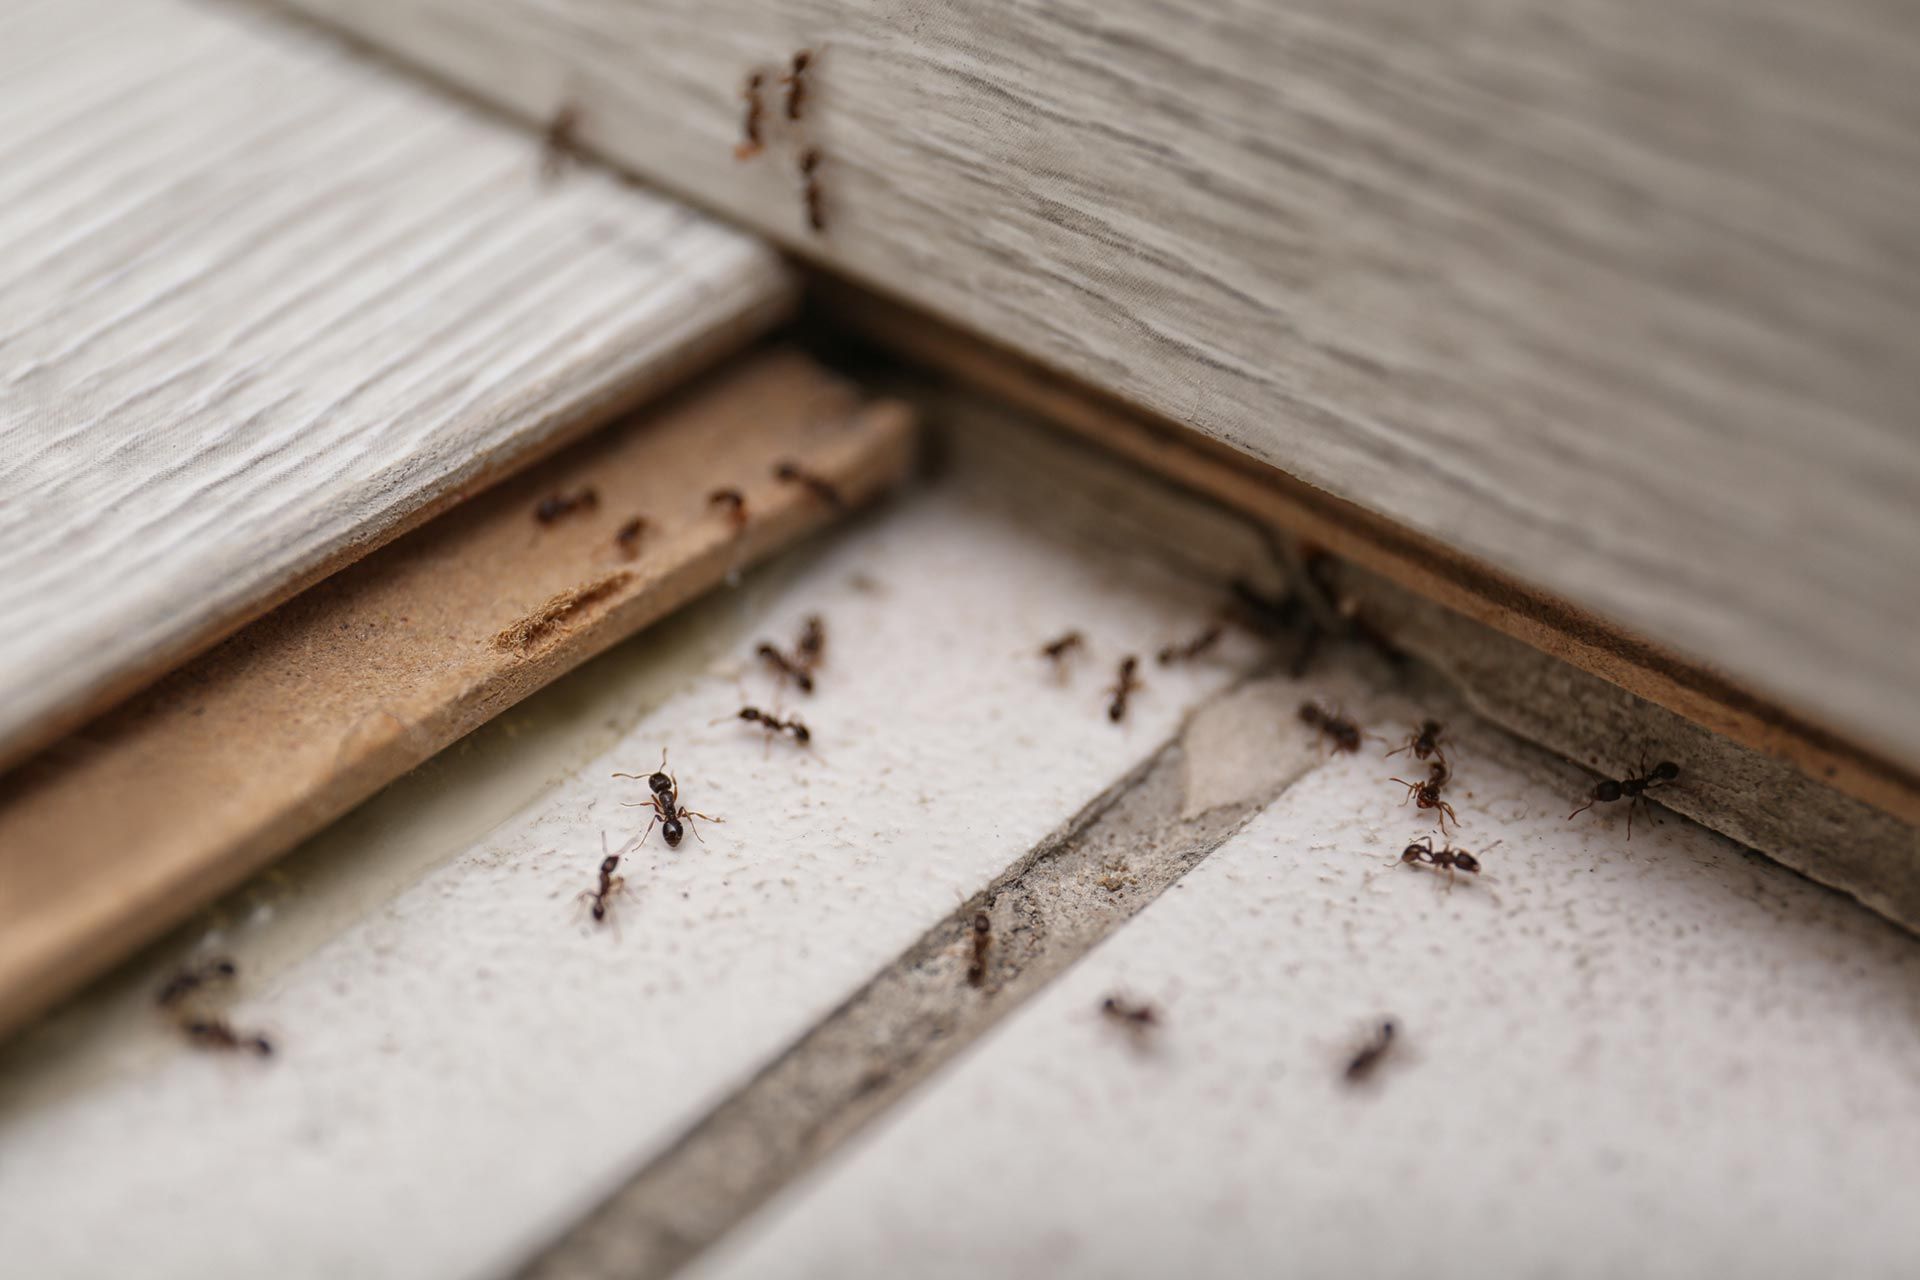 Pilgrim Pest Professionals is an ant exterminator that offers ant control services and ant removal services.